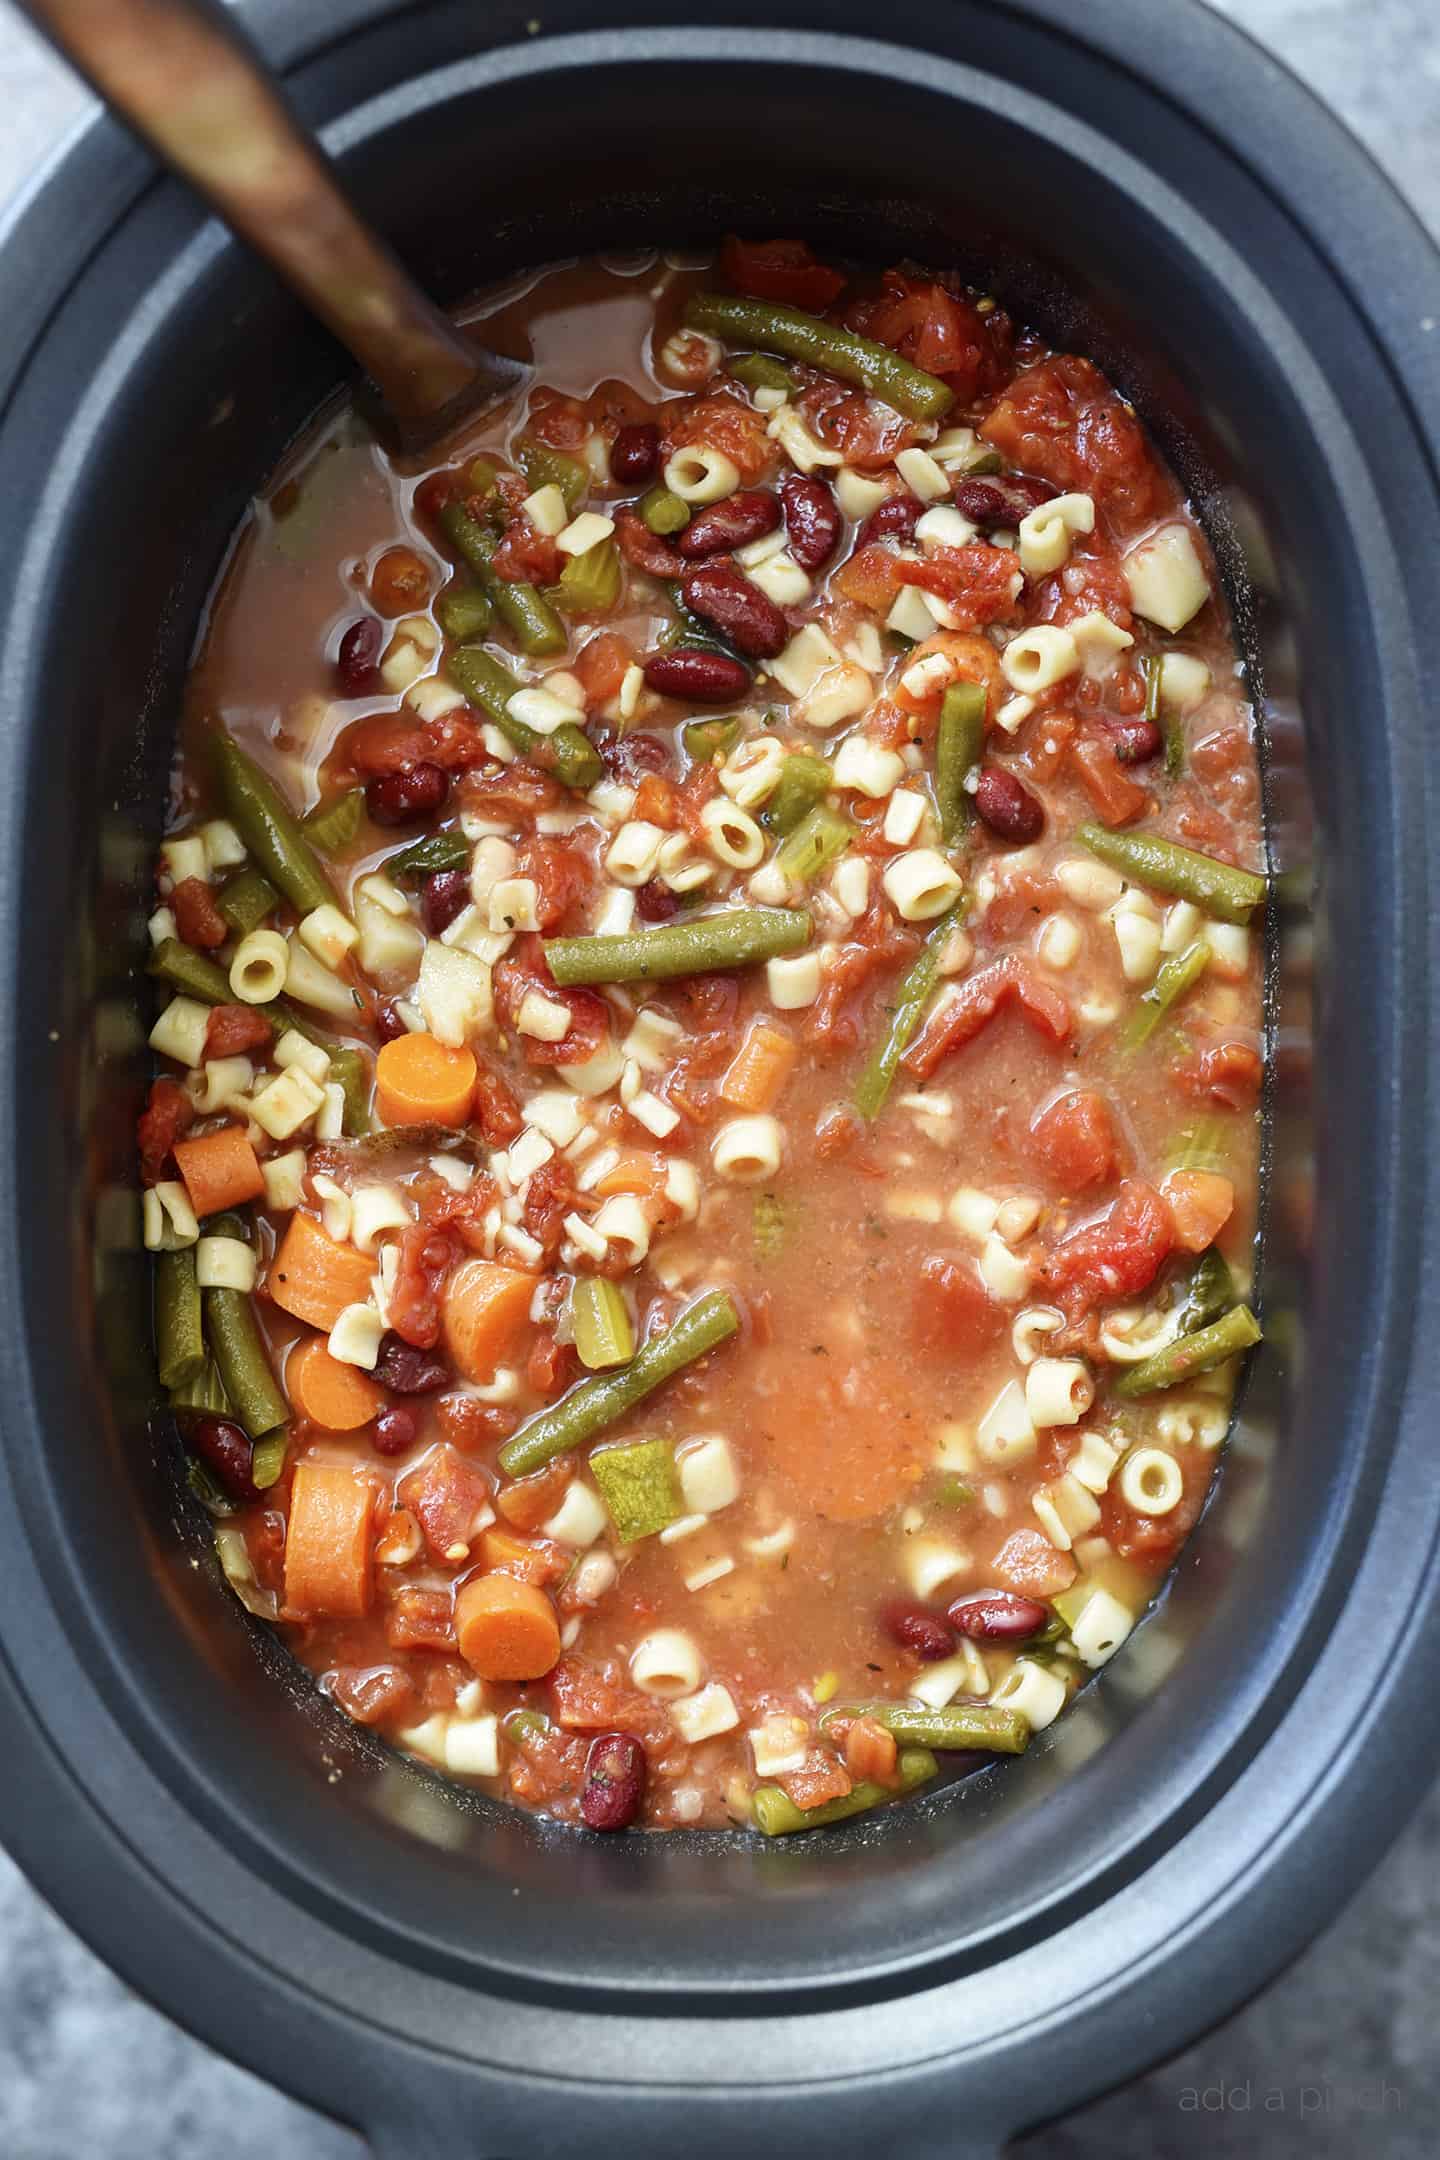 Slow Cooker Minestrone Soup Recipe - Add a Pinch